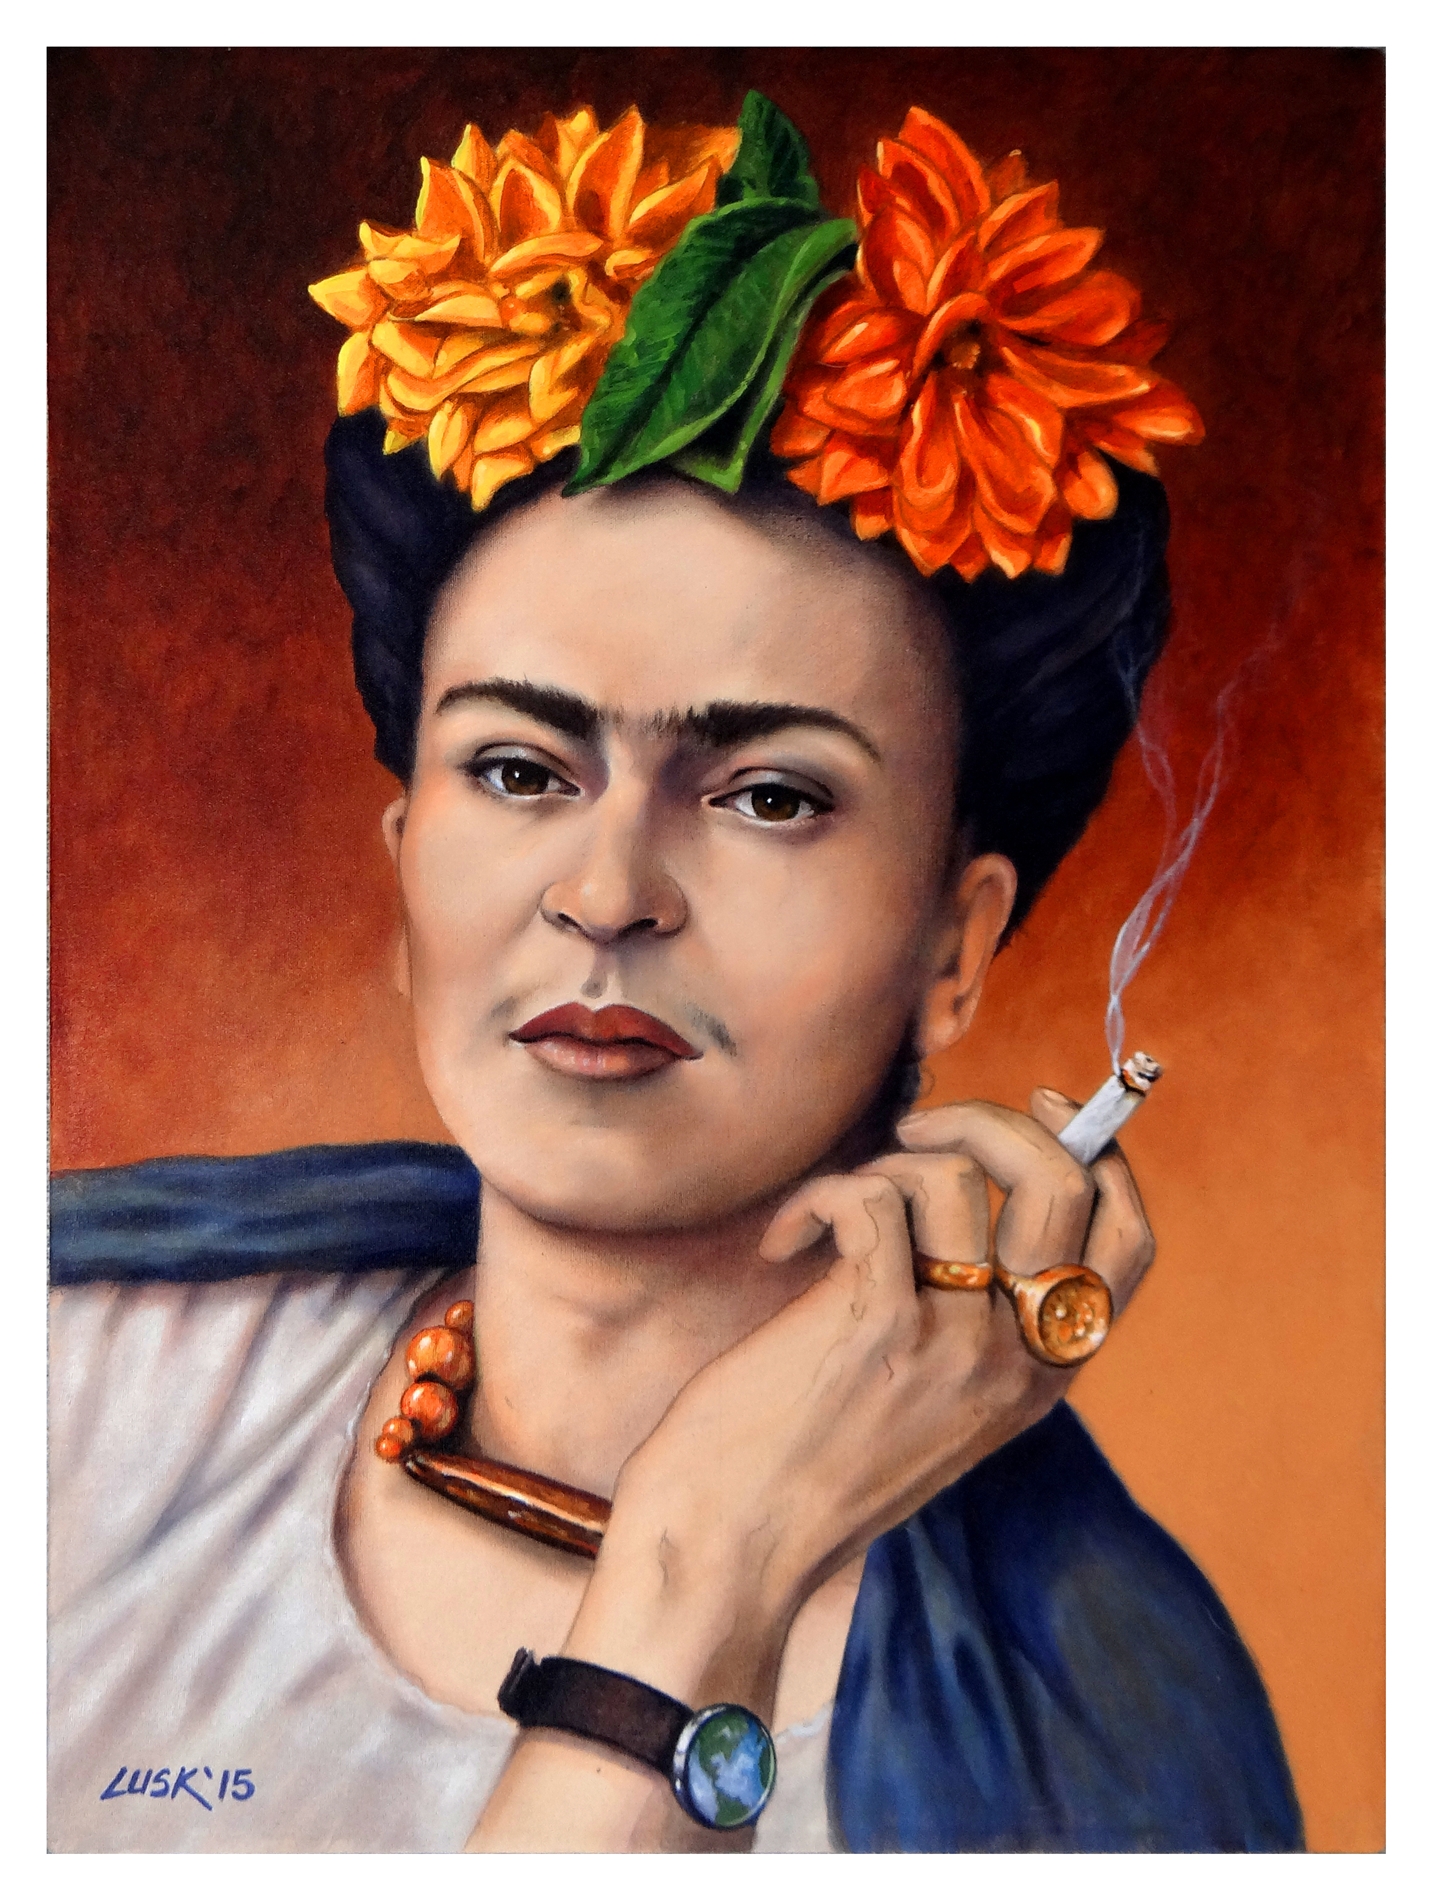 Frida Kahlo Image In Repose HD Wallpaper And Background